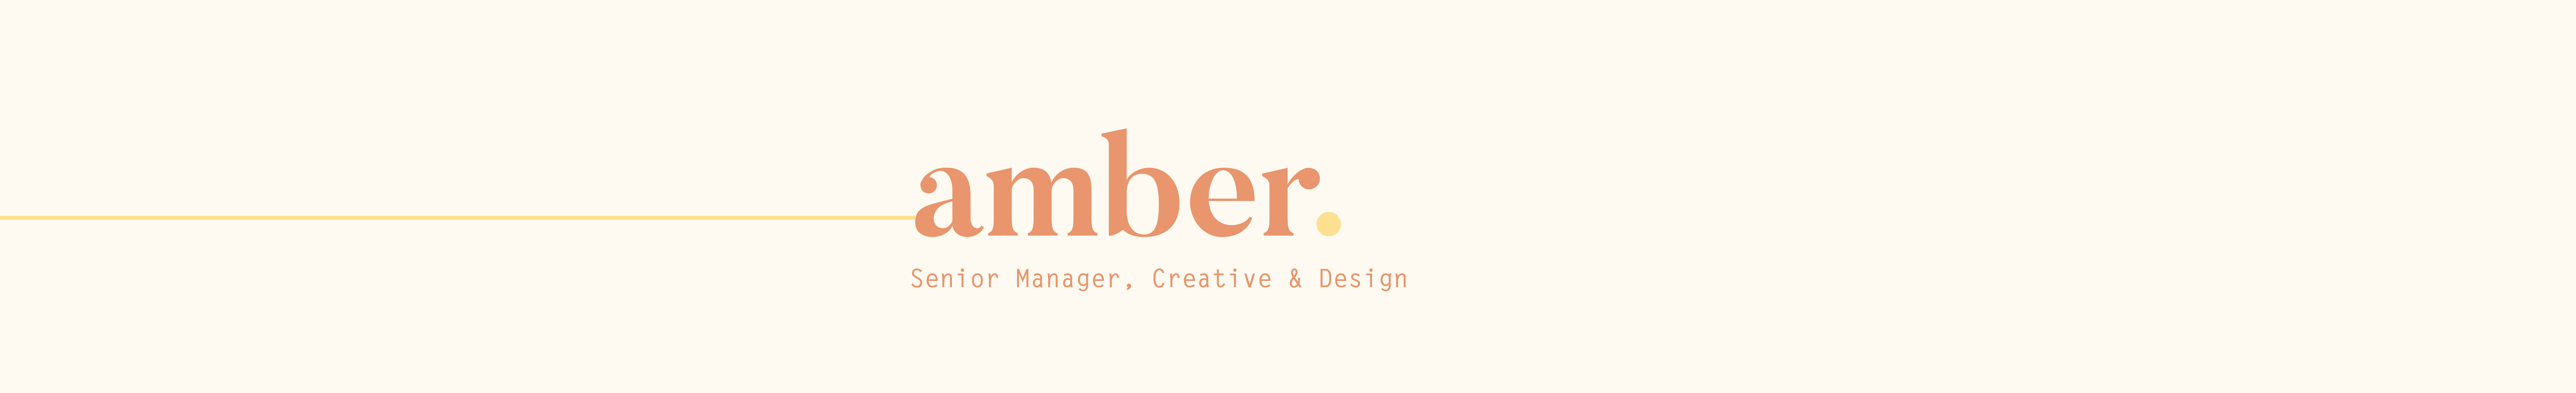 Amber Geal-Otter's profile banner